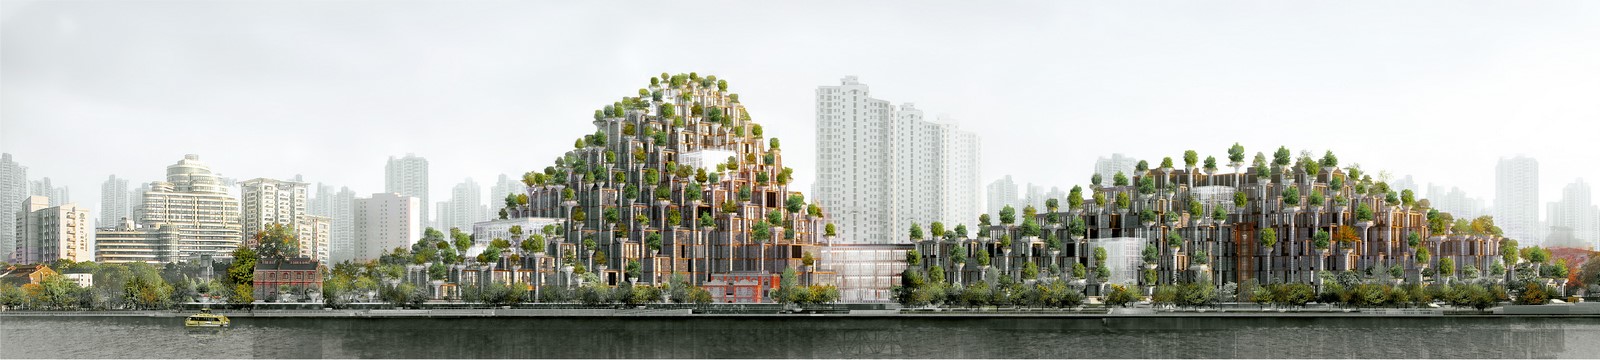 1,000 Trees shopping centre in Shanghai unveiled by Thomas Heatherwick - Sheet8